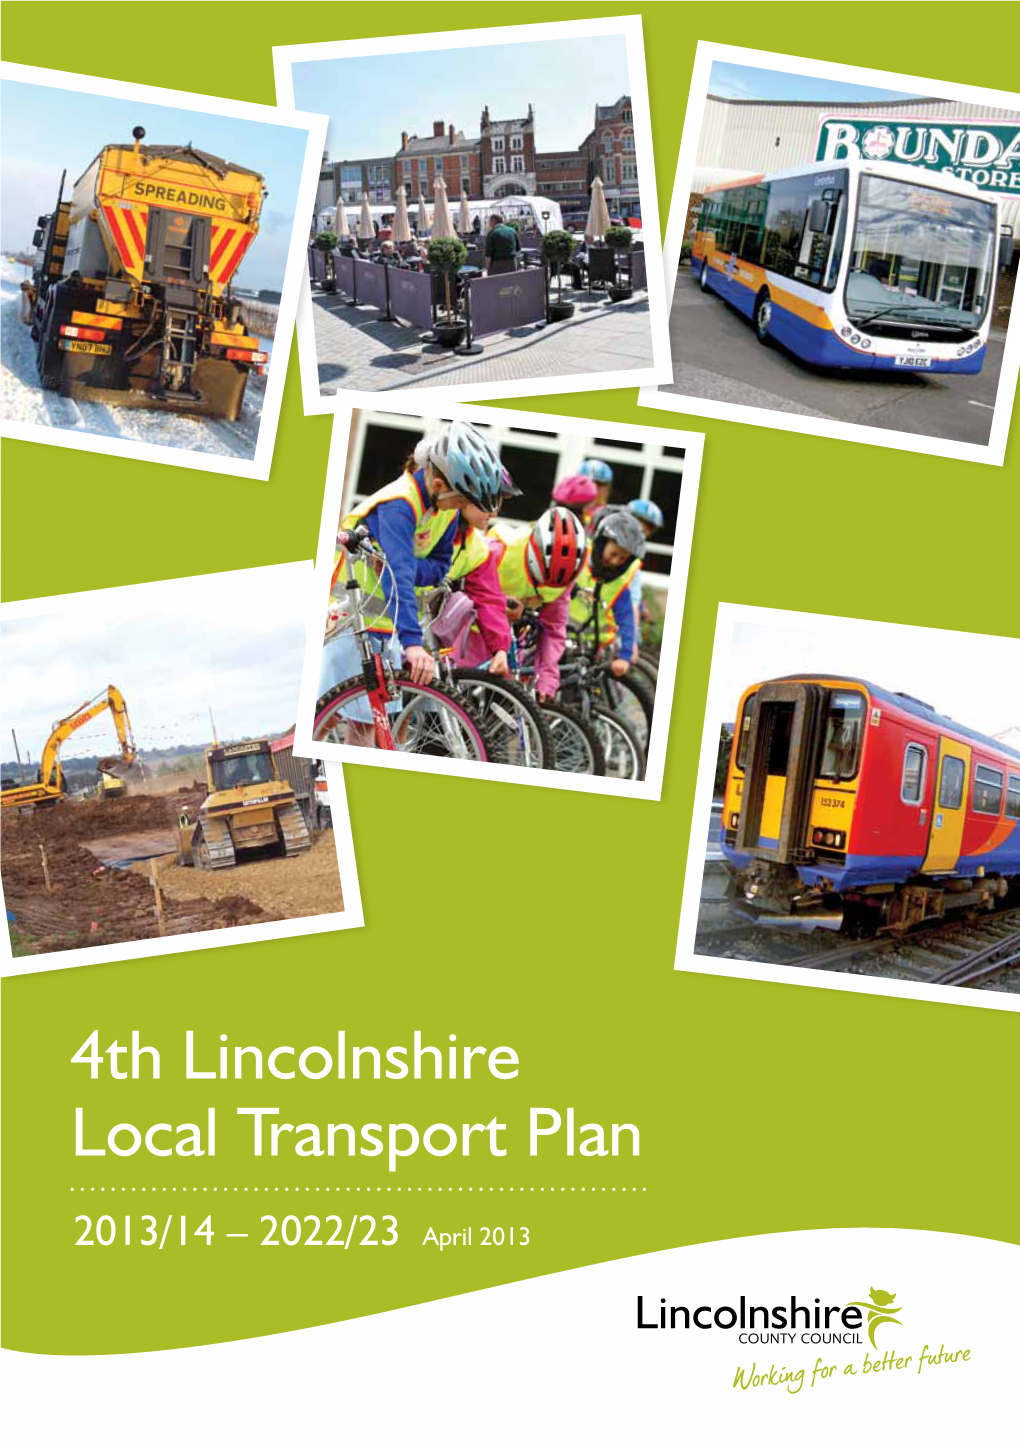 4Th Lincolnshire Local Transport Plan 2013/14-2022/23